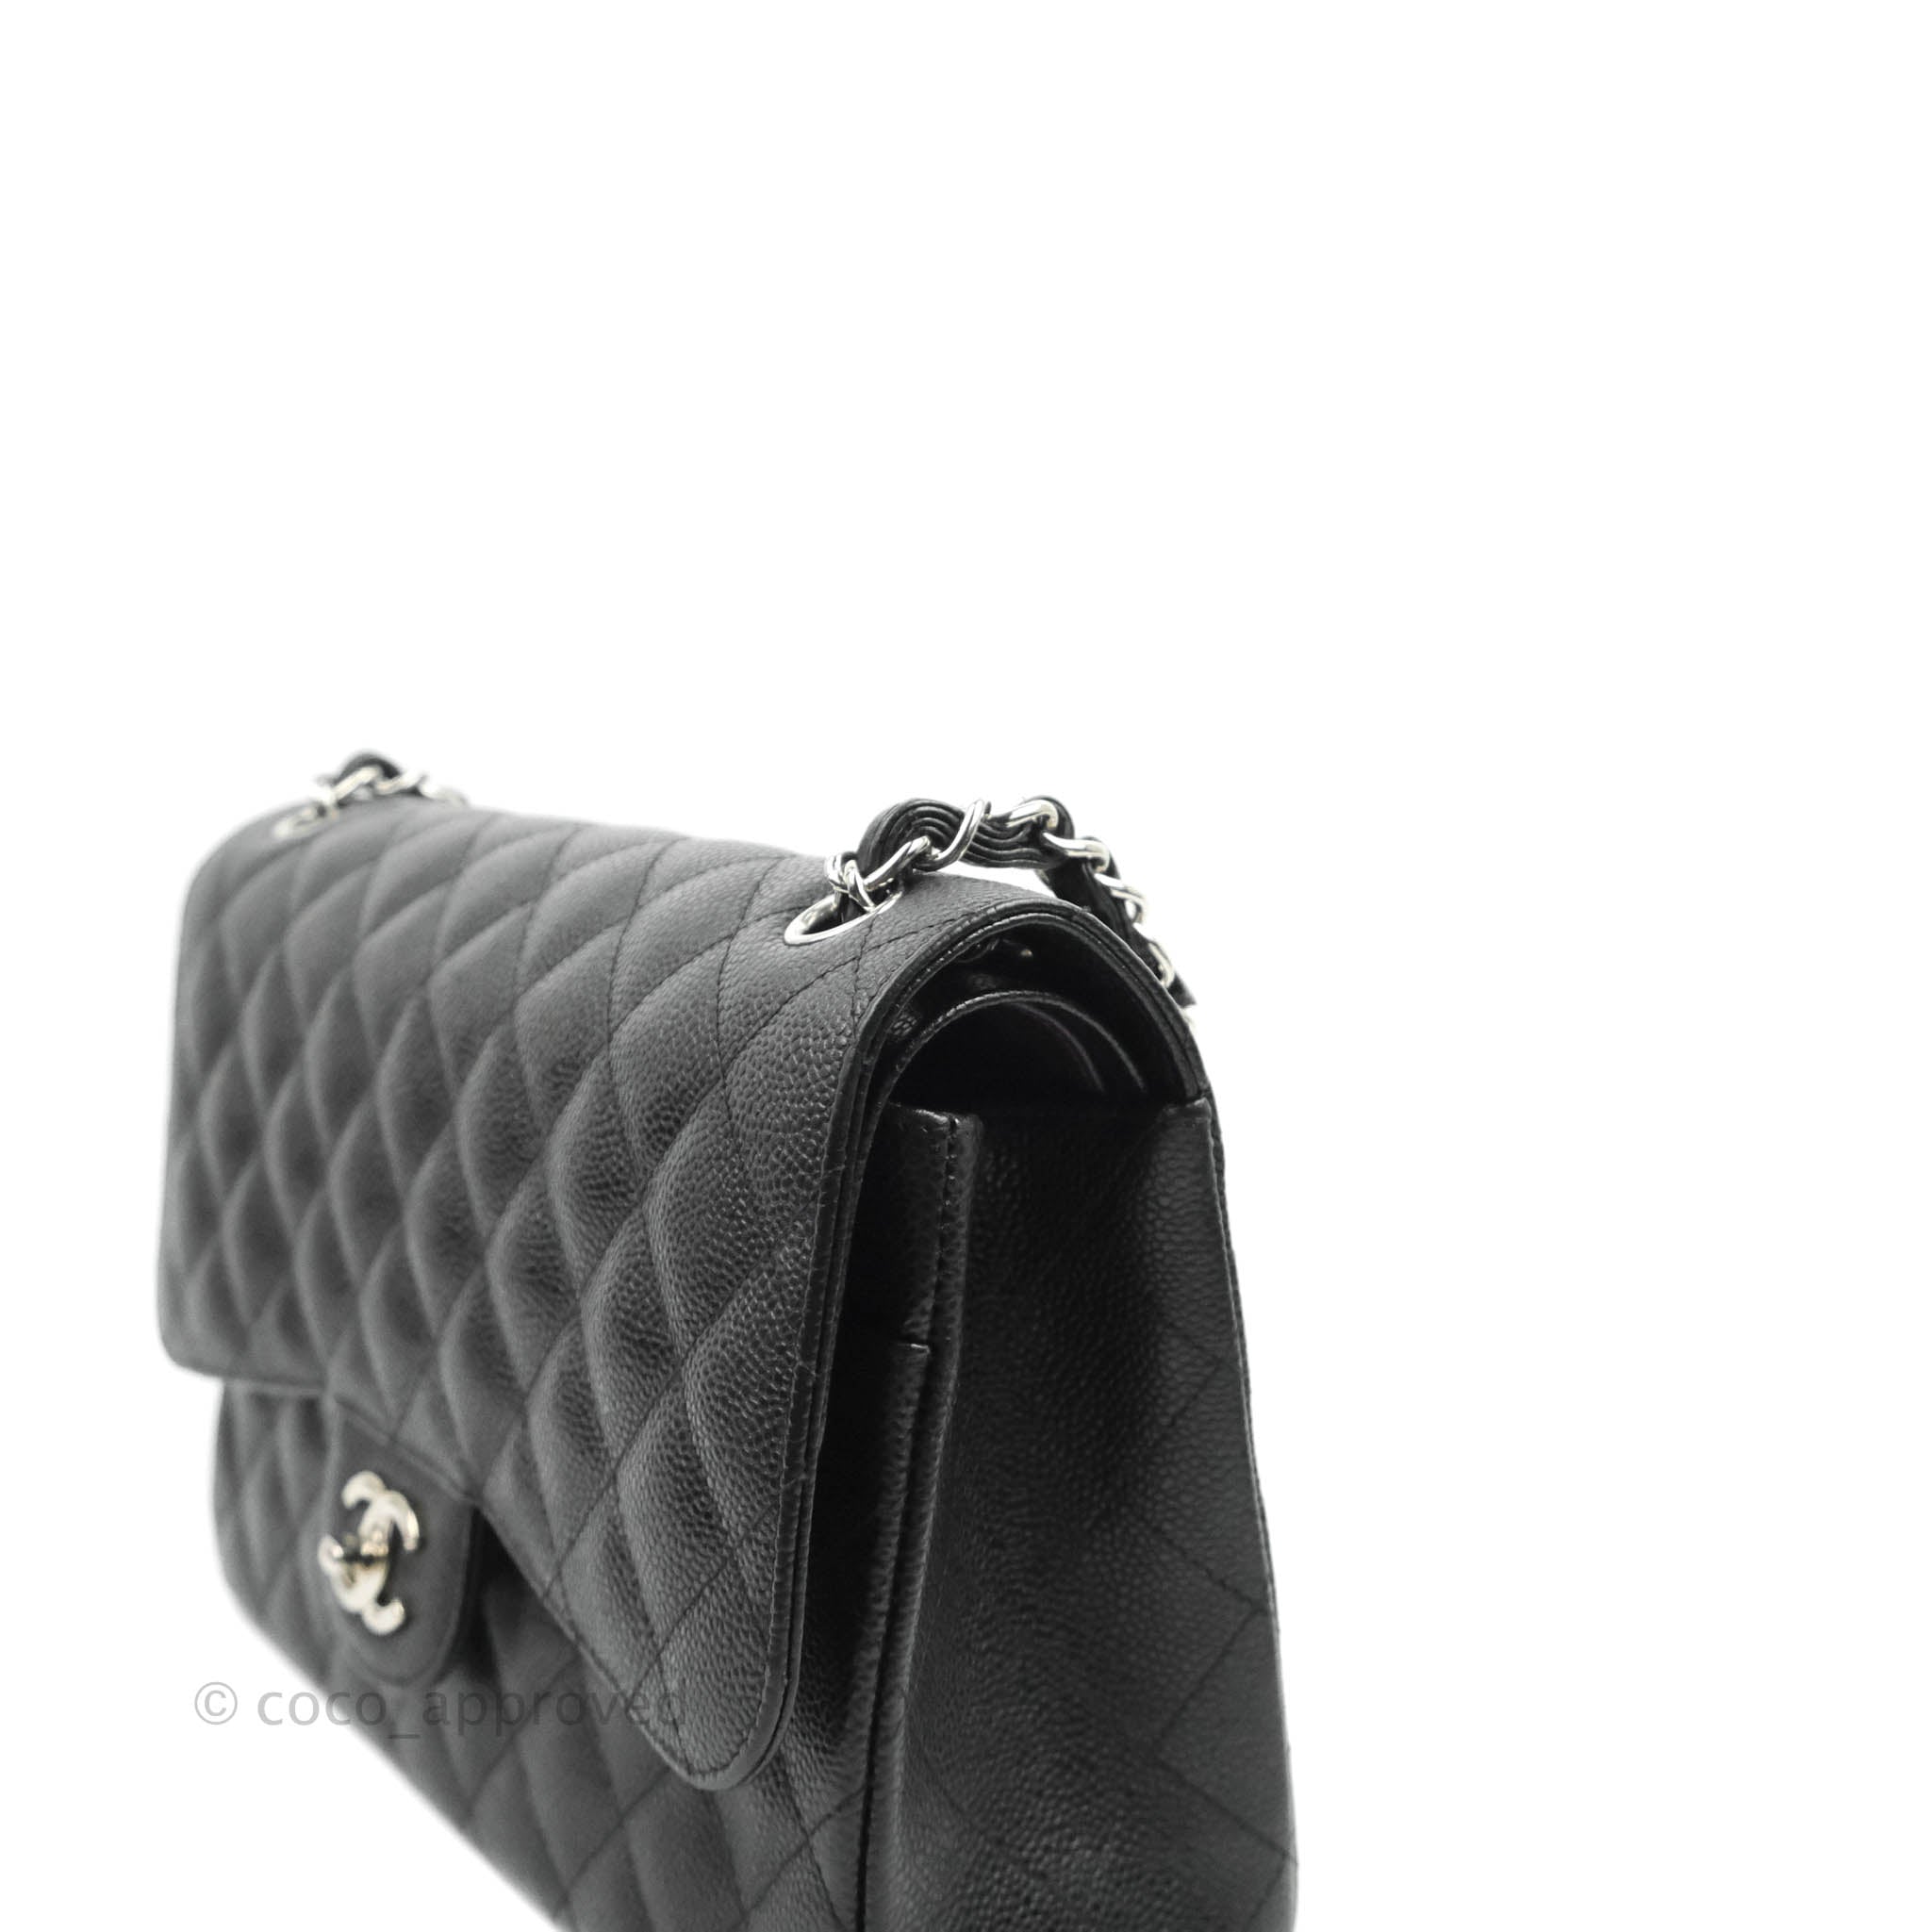 Hiroo store chanel coco - Gem